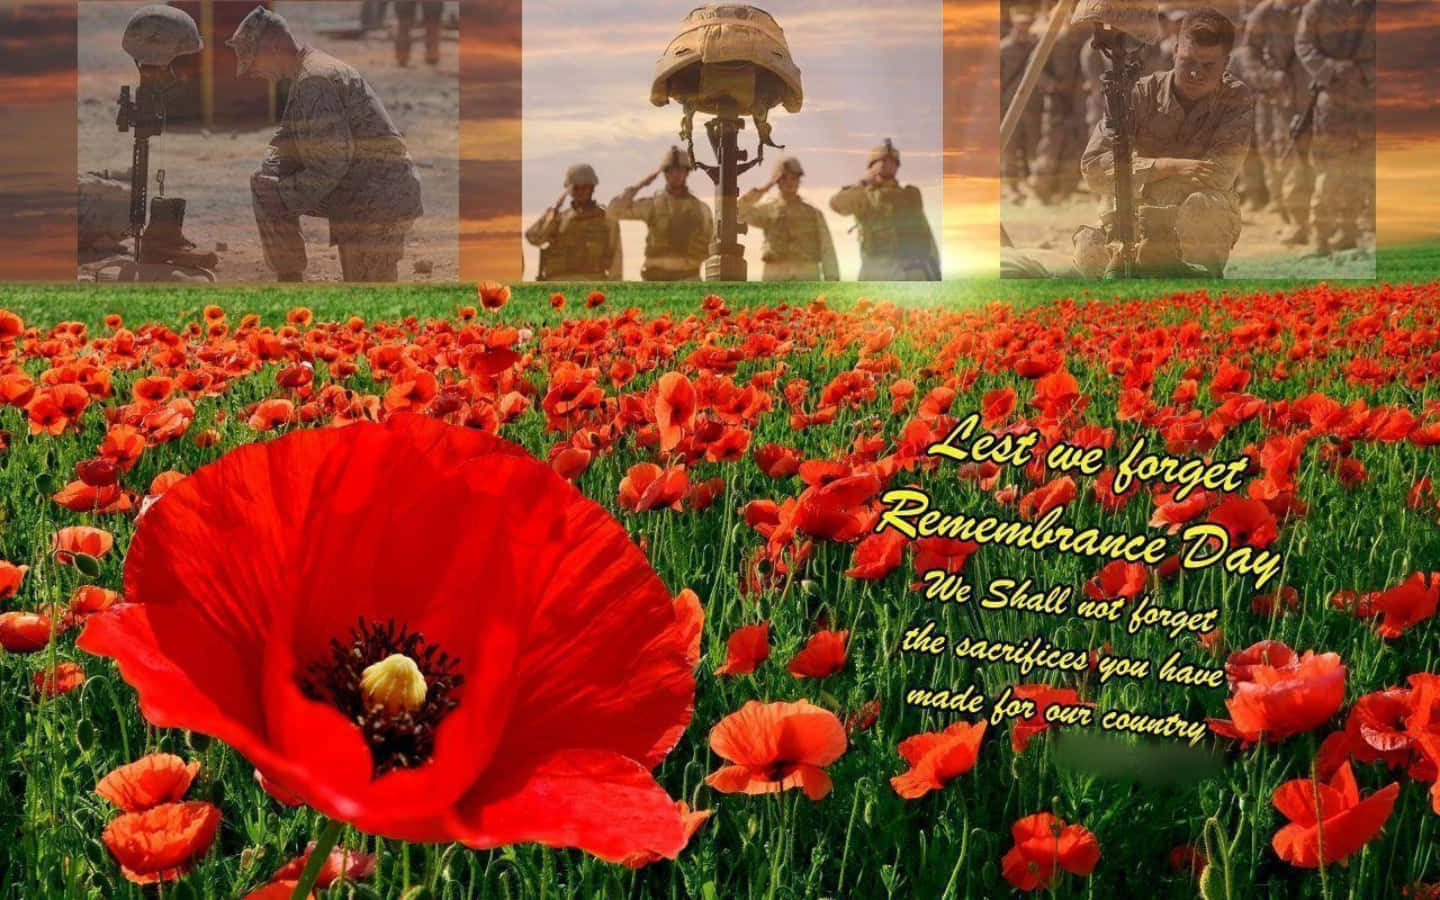 Honor and remember those who have made the ultimate sacrifice